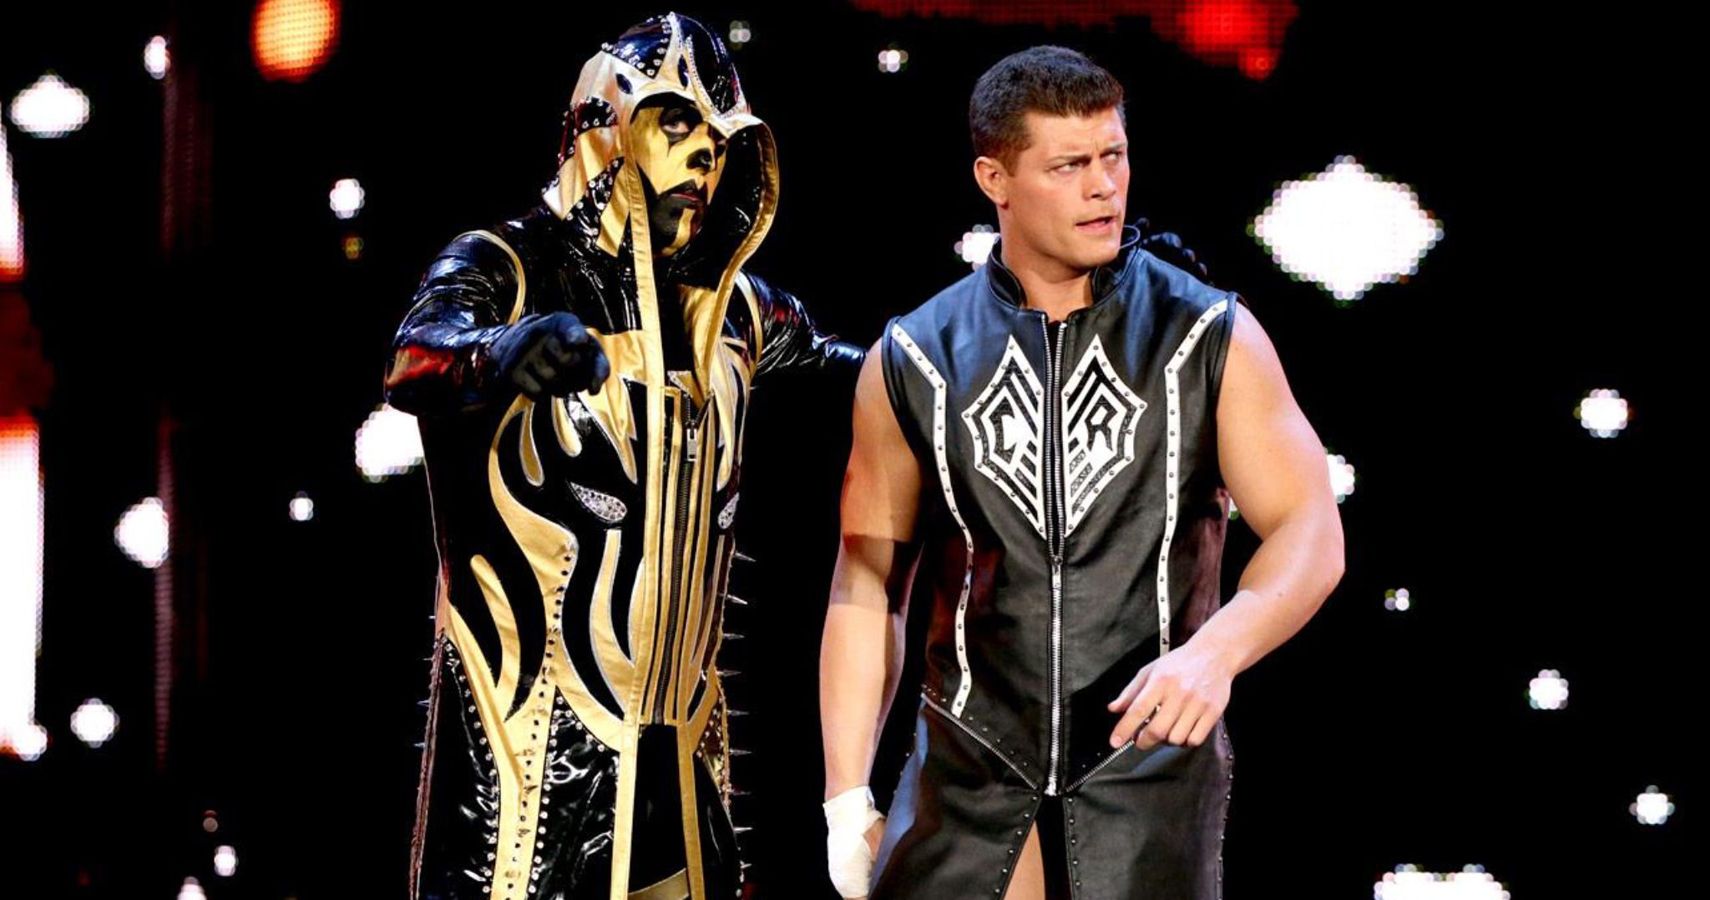 10 WrestleMania Dream Matches That Never Happened